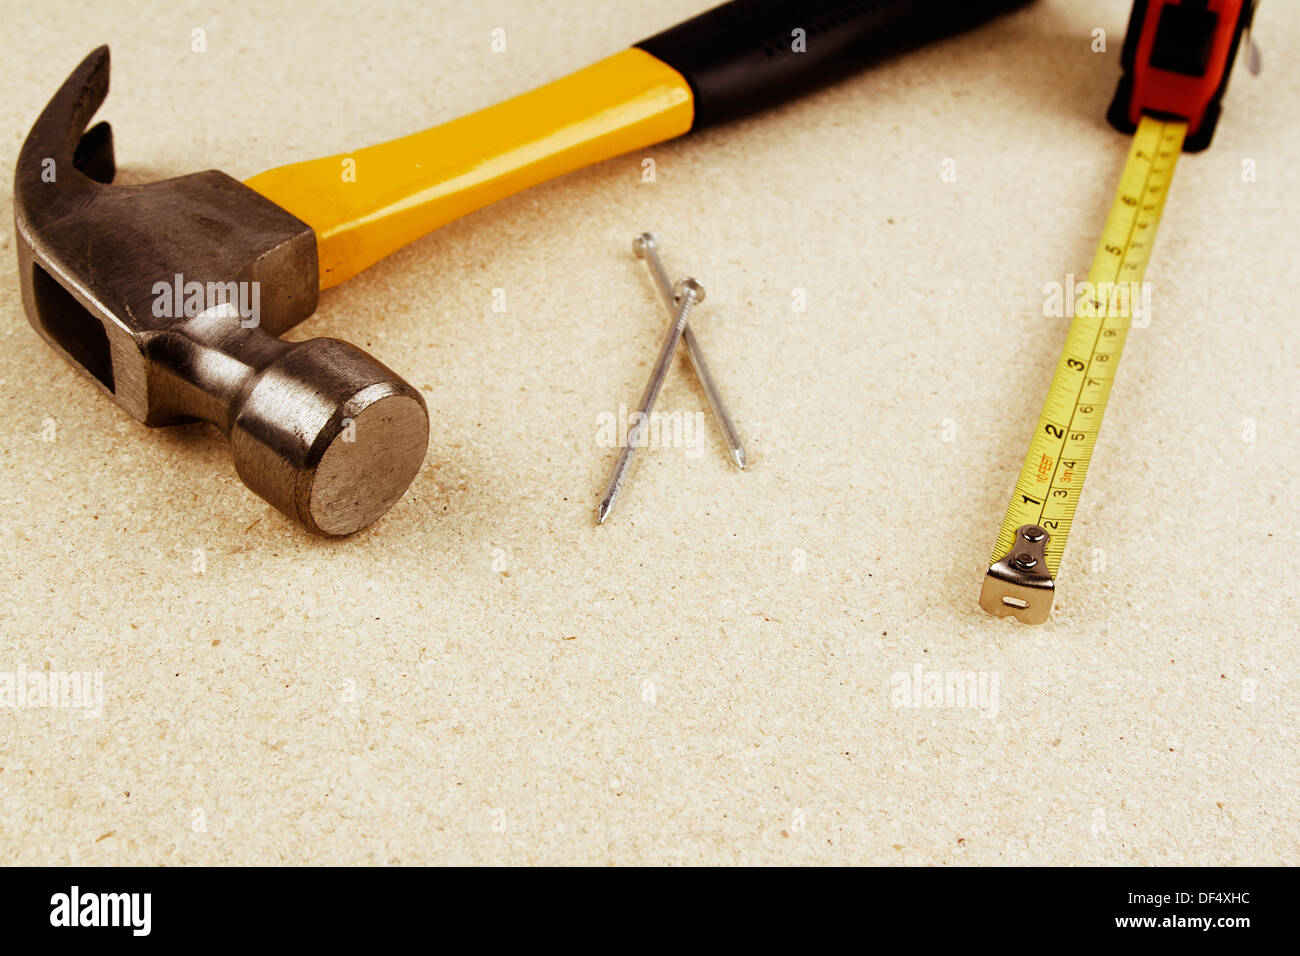 Hammer, nails and tape measure. Stock Photo